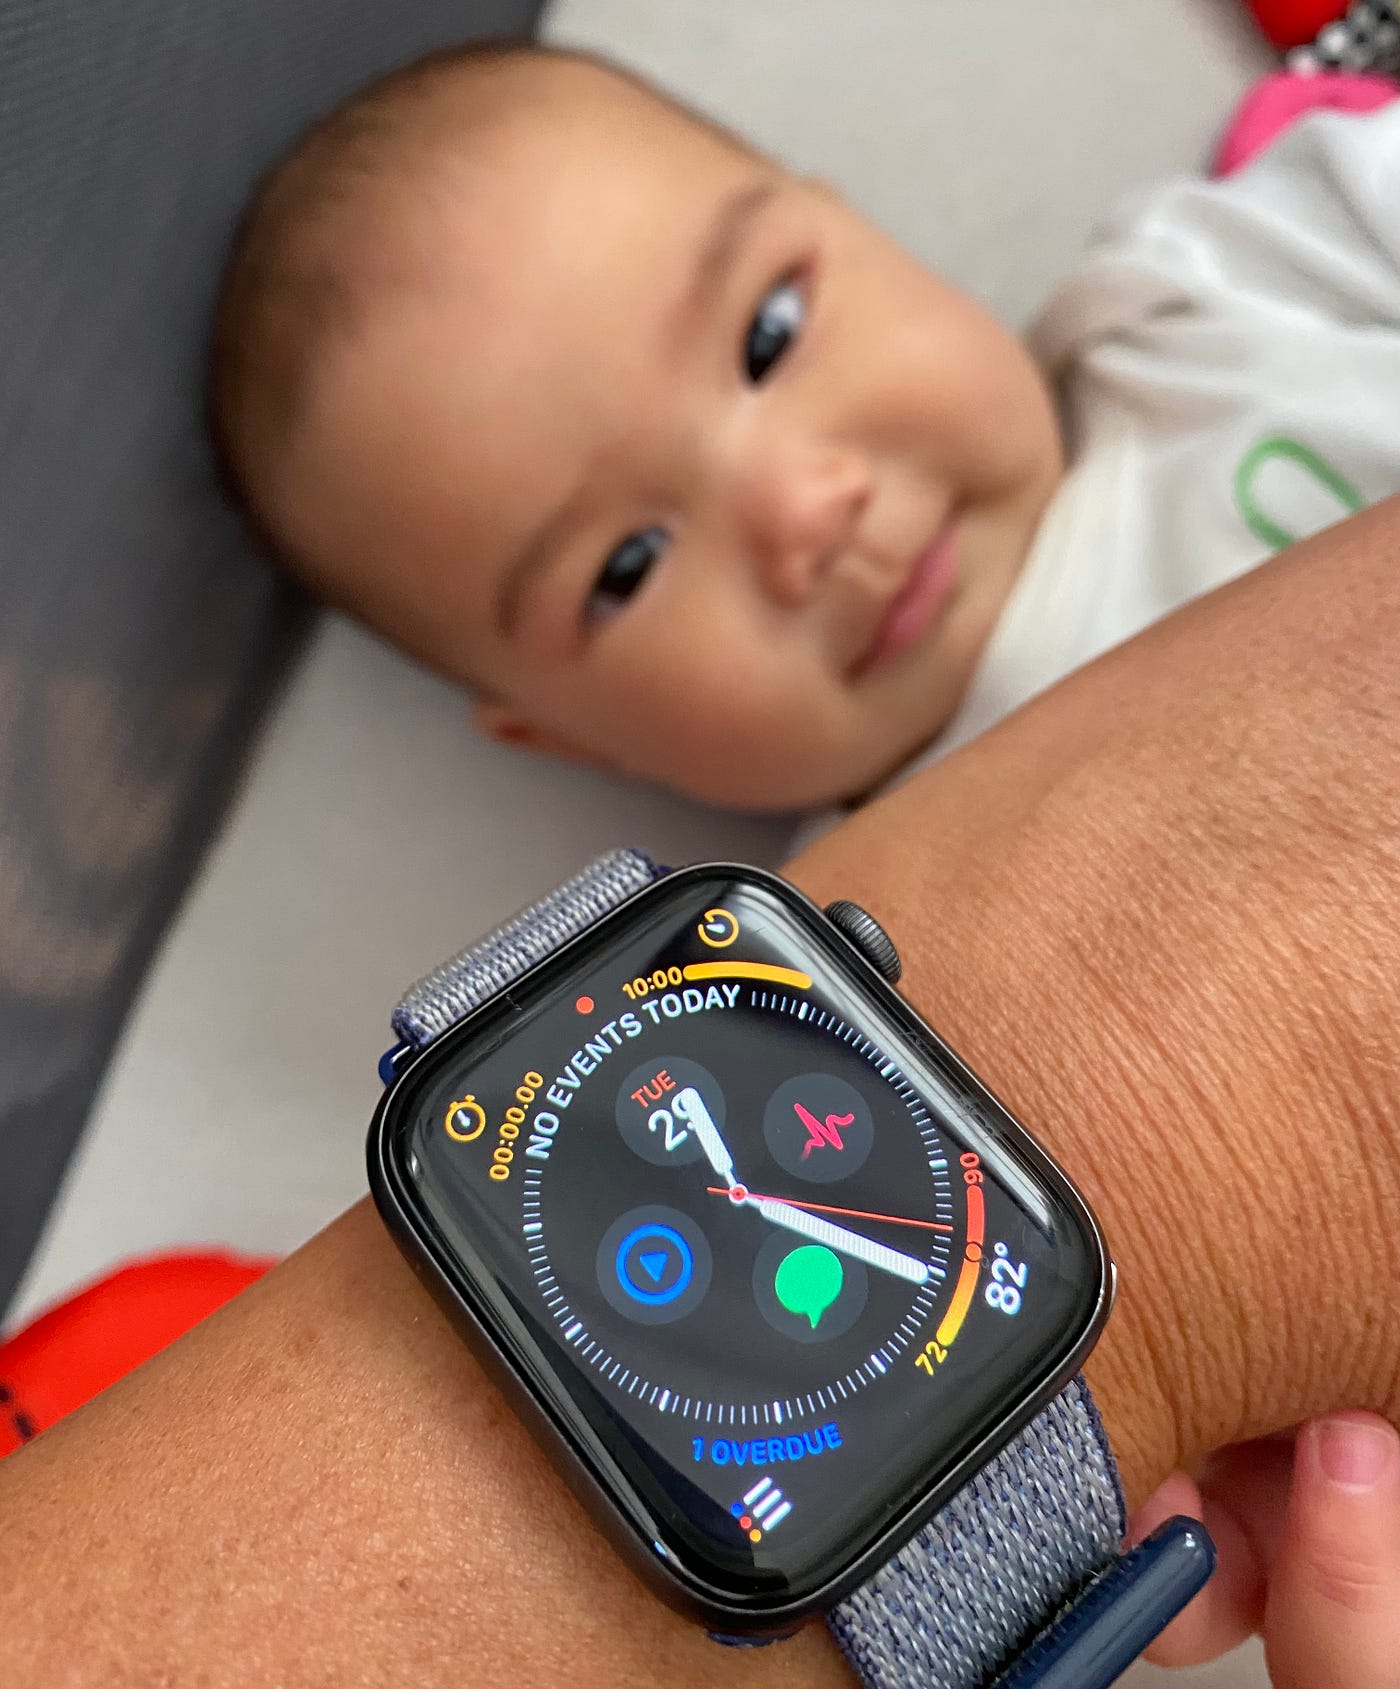 Apple Gear For New Parents. Get baby stuff you and your kid will…, by Jonathan  Kim, Mac O'Clock